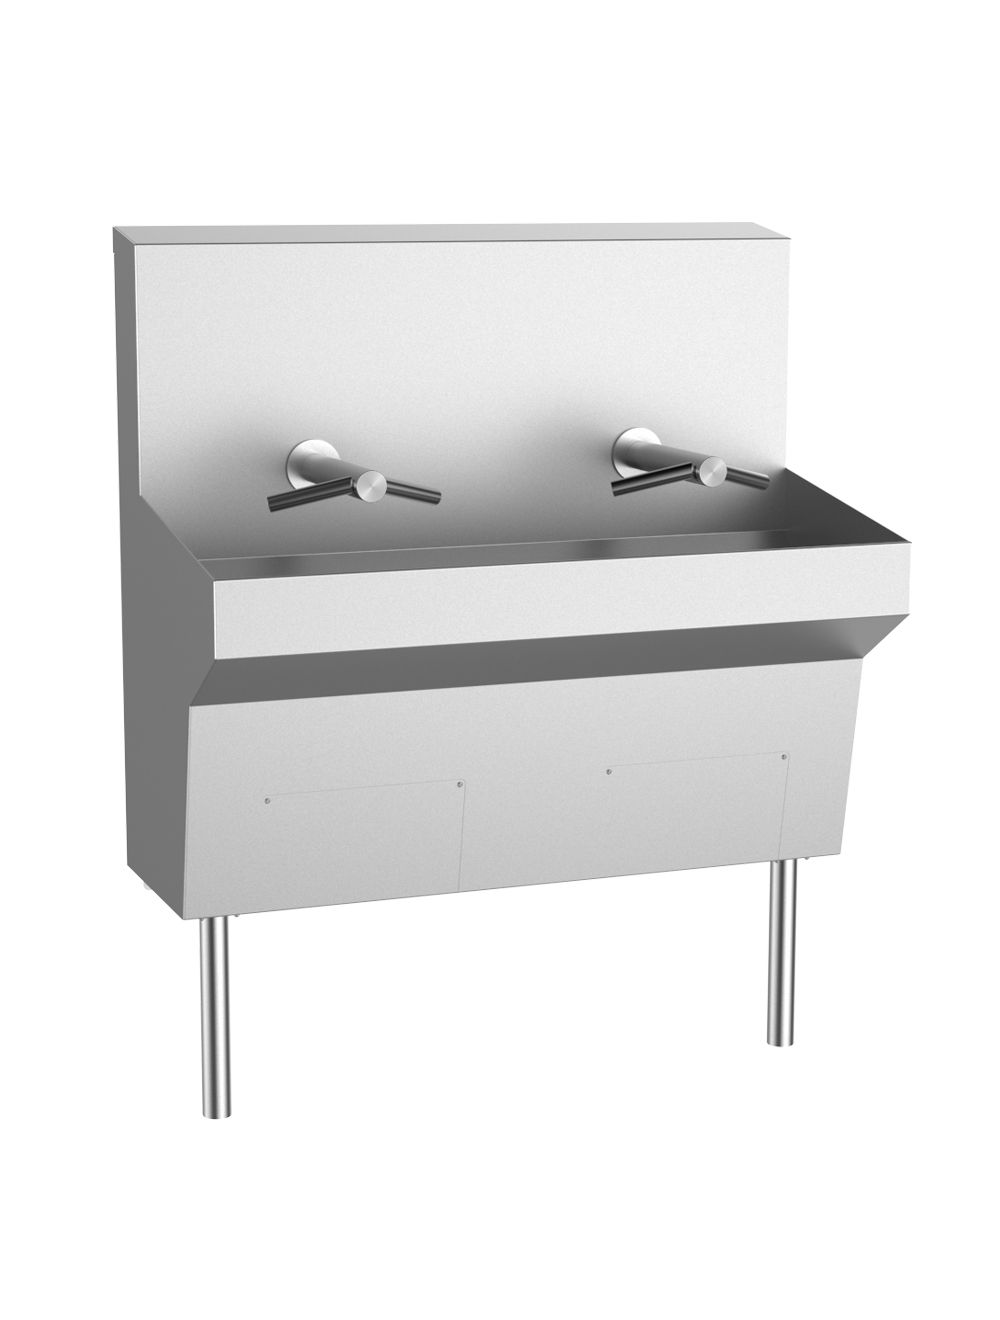 Wall Mounted Stainless Trough Sink Featuring the Dyson Wash+Dry Dryer SYSPAL | UK